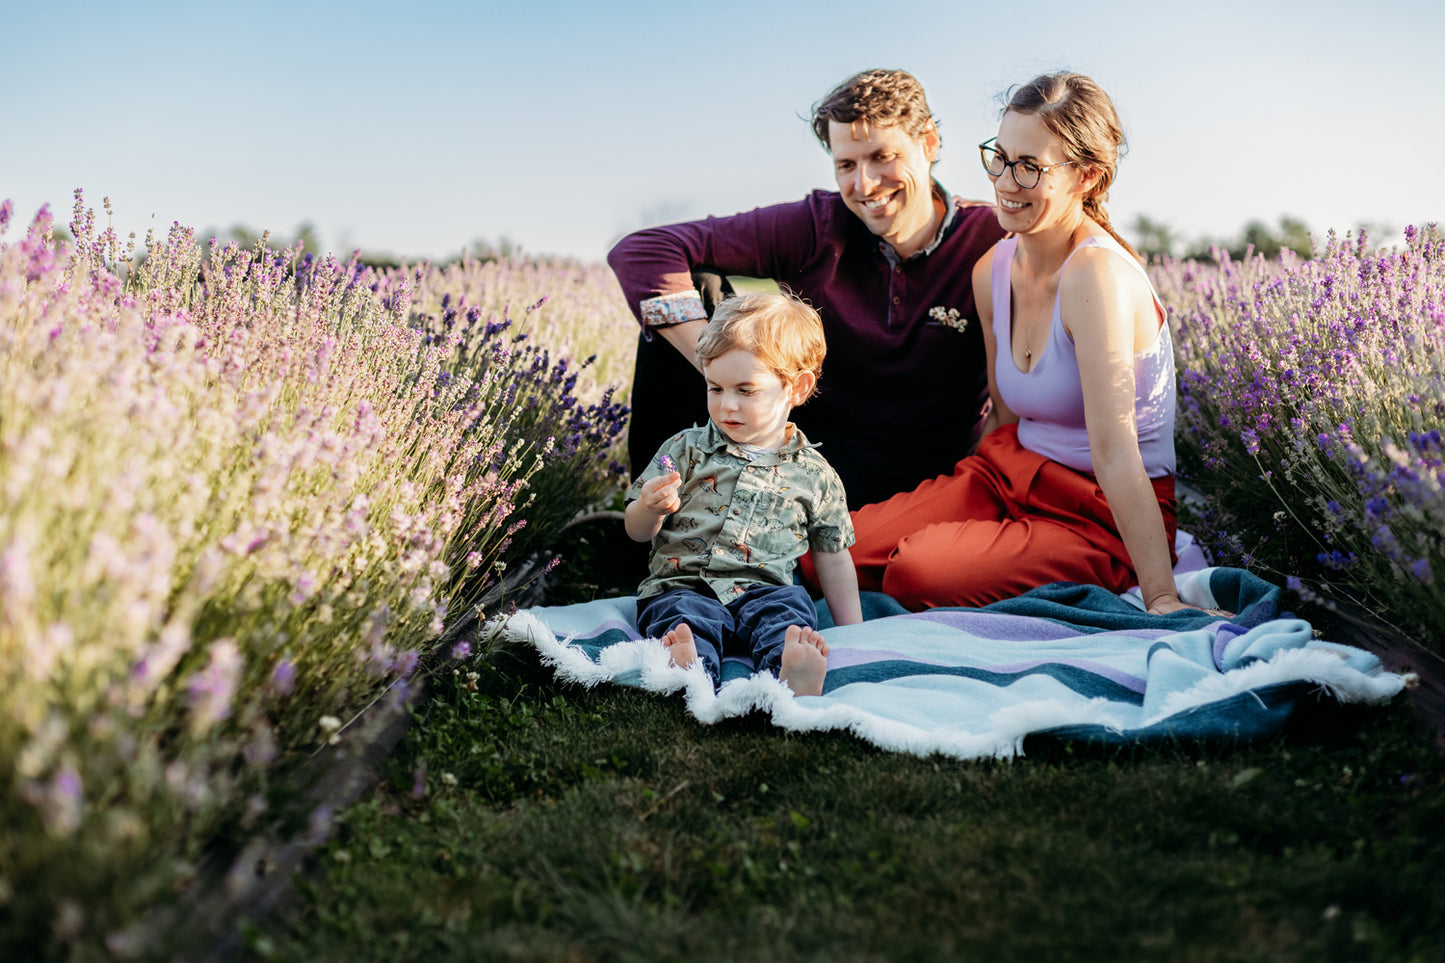 Steve, Stephanie and Felix (child) sit on purple and green blanket between two blooming rows of purple lavender.